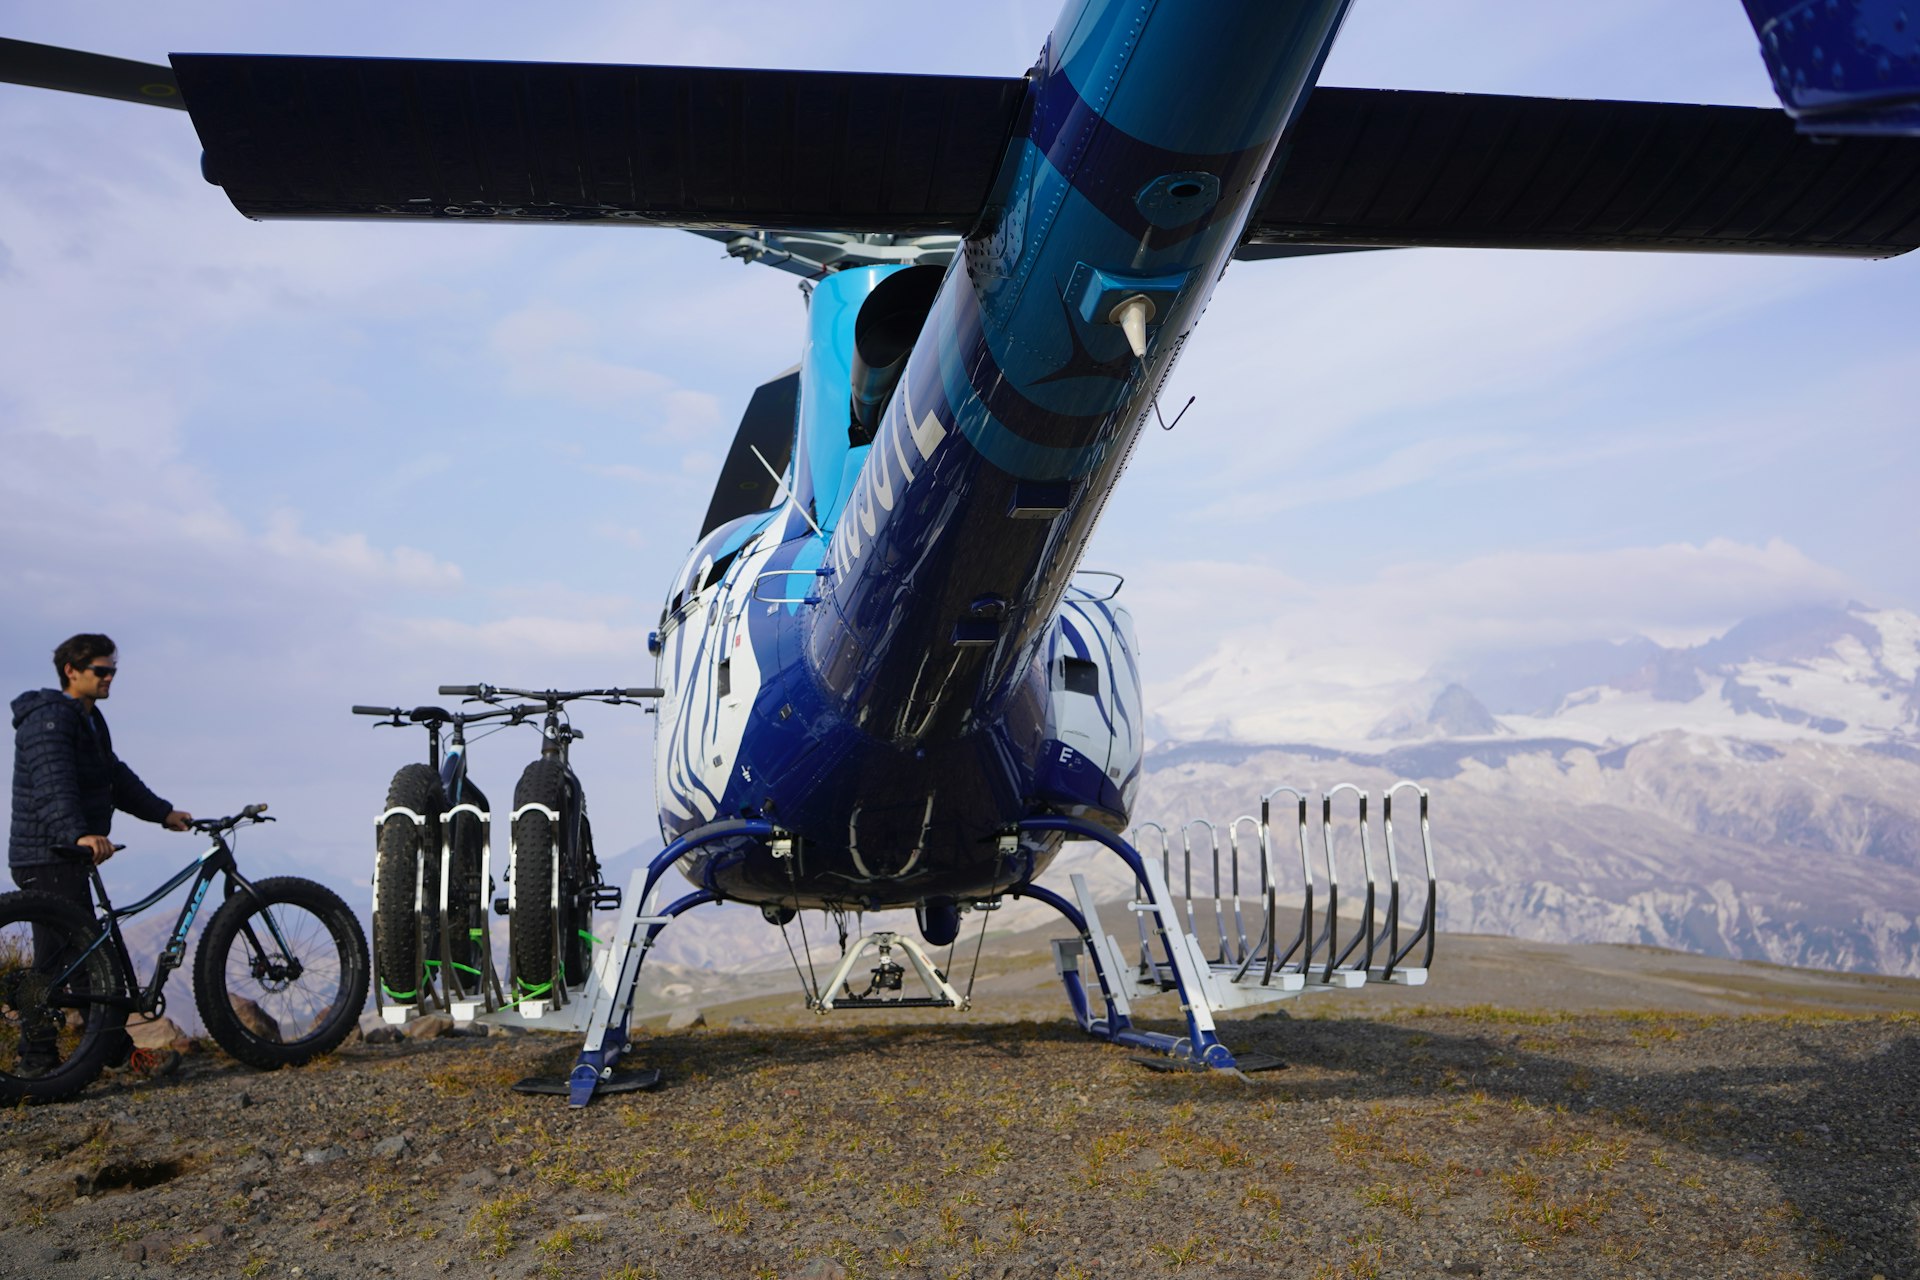 The rear of a helicopter with bike racks loaded with fat tire bikes